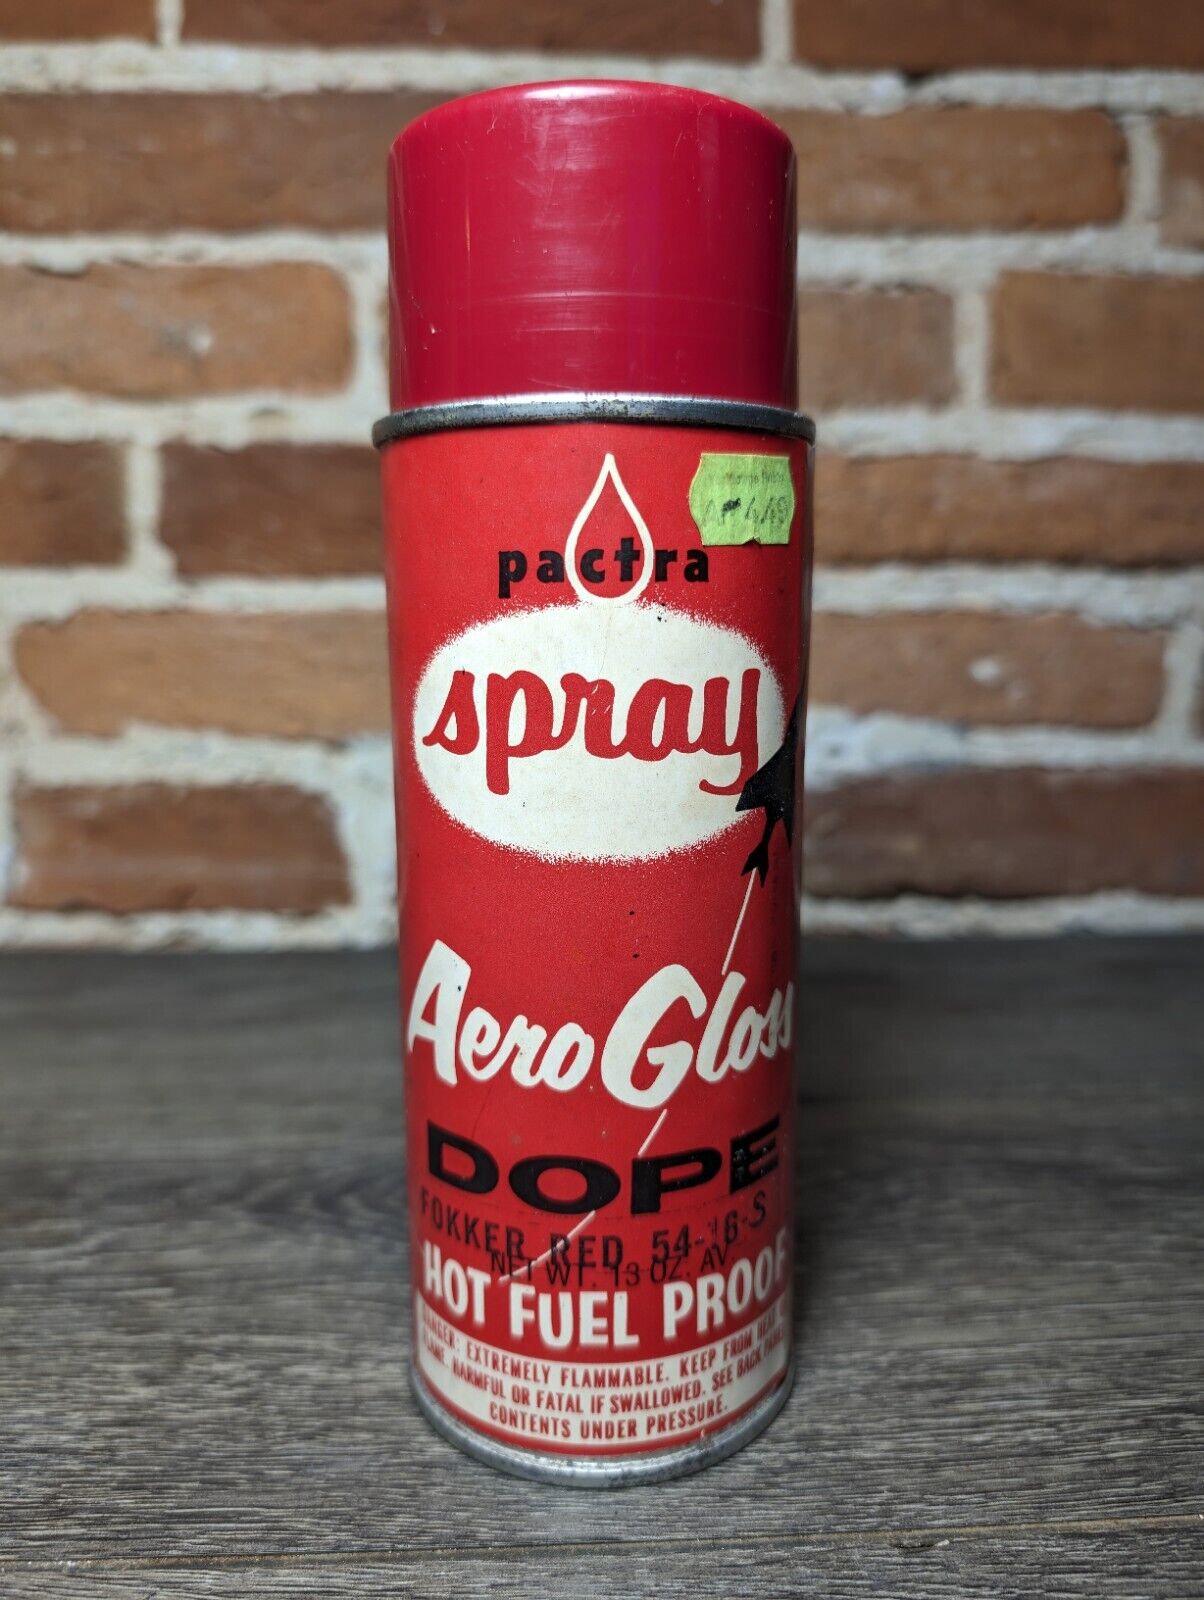 Vintage Pactra FOKKER RED Spray Paint Can Aero Gloss Dope Advertising